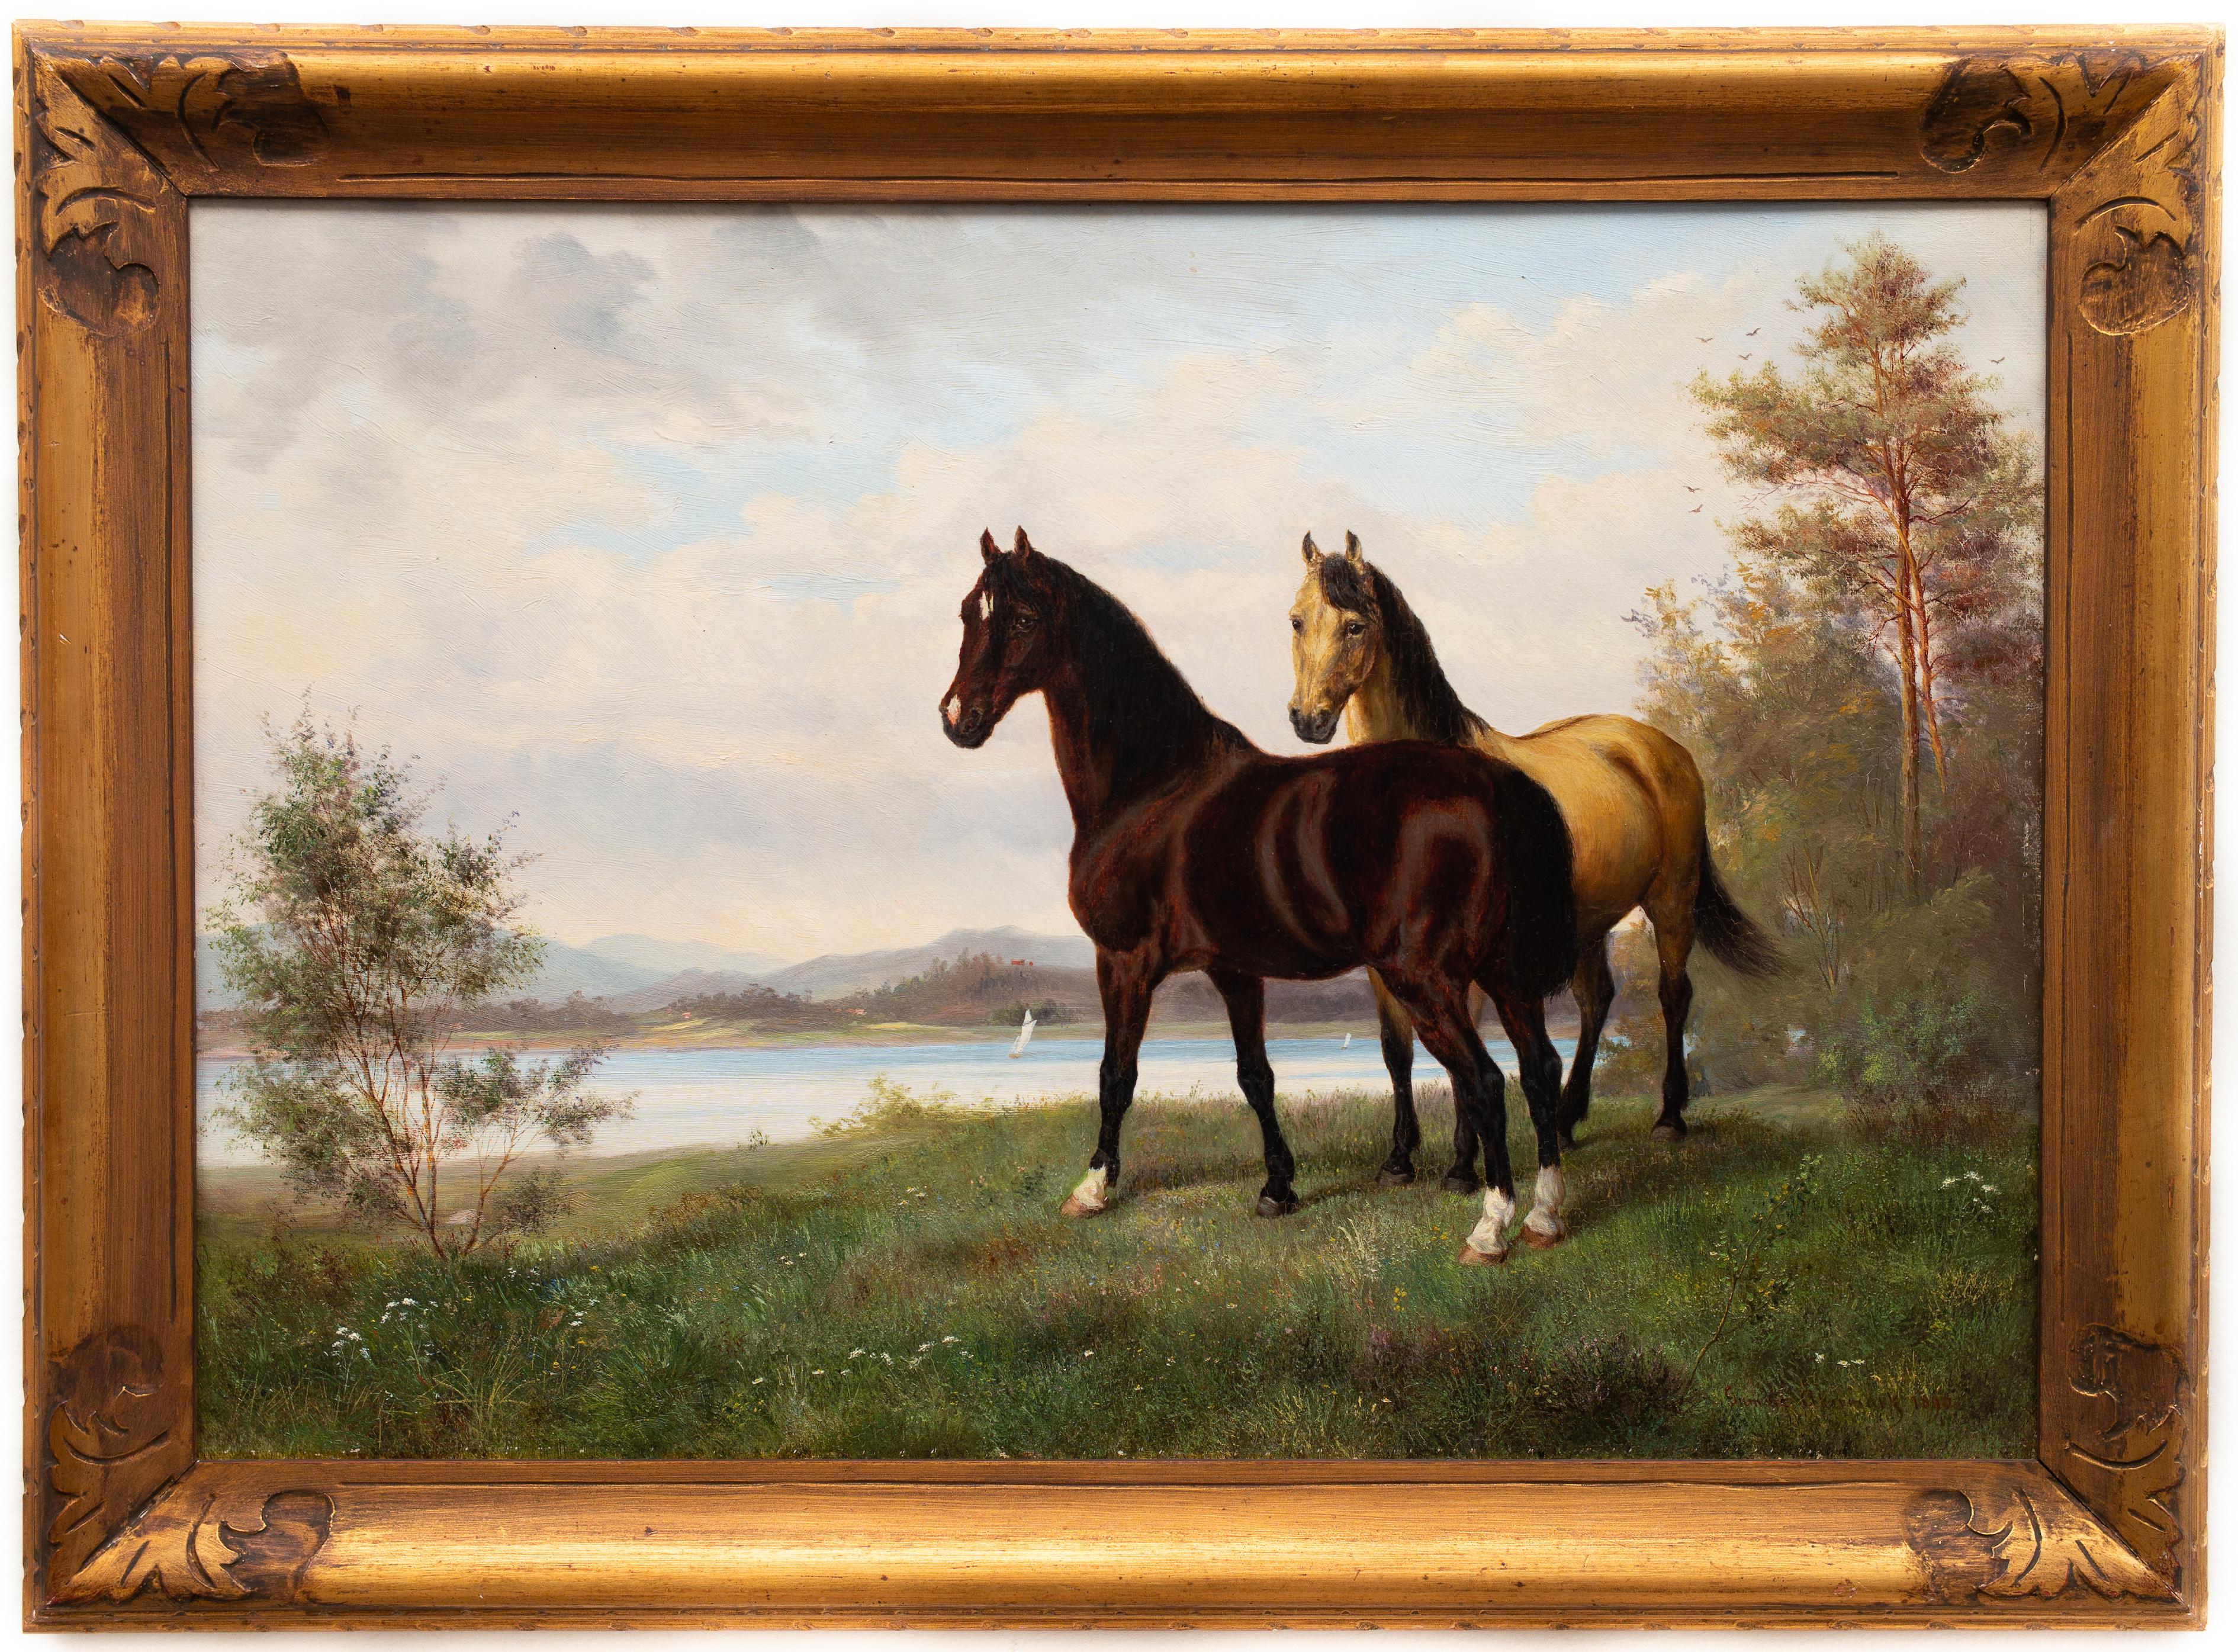 Gumme Åkermark Landscape Painting - Two Horses in a Landscape With Sailboats in Distance, Swedish, Oil on Canvas 